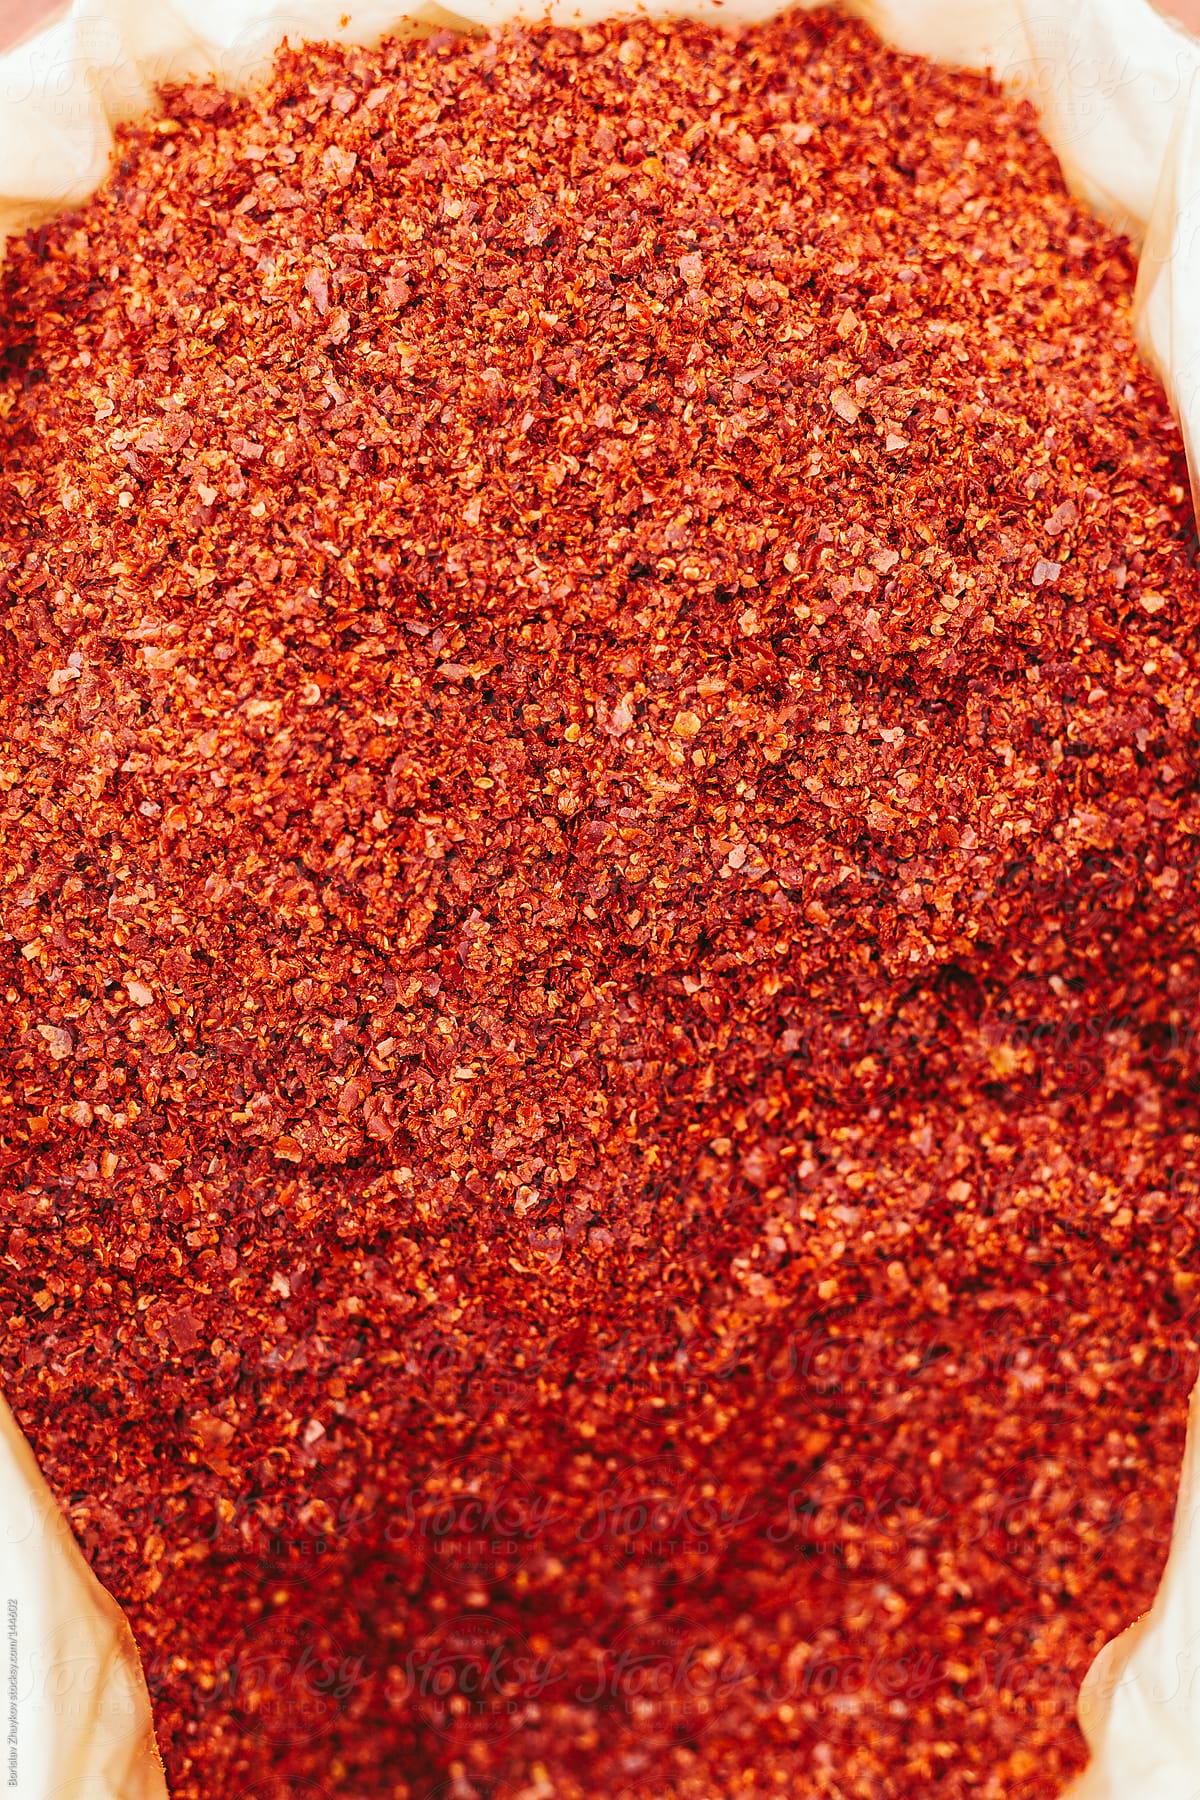 Red hot chili pepper spice on the market